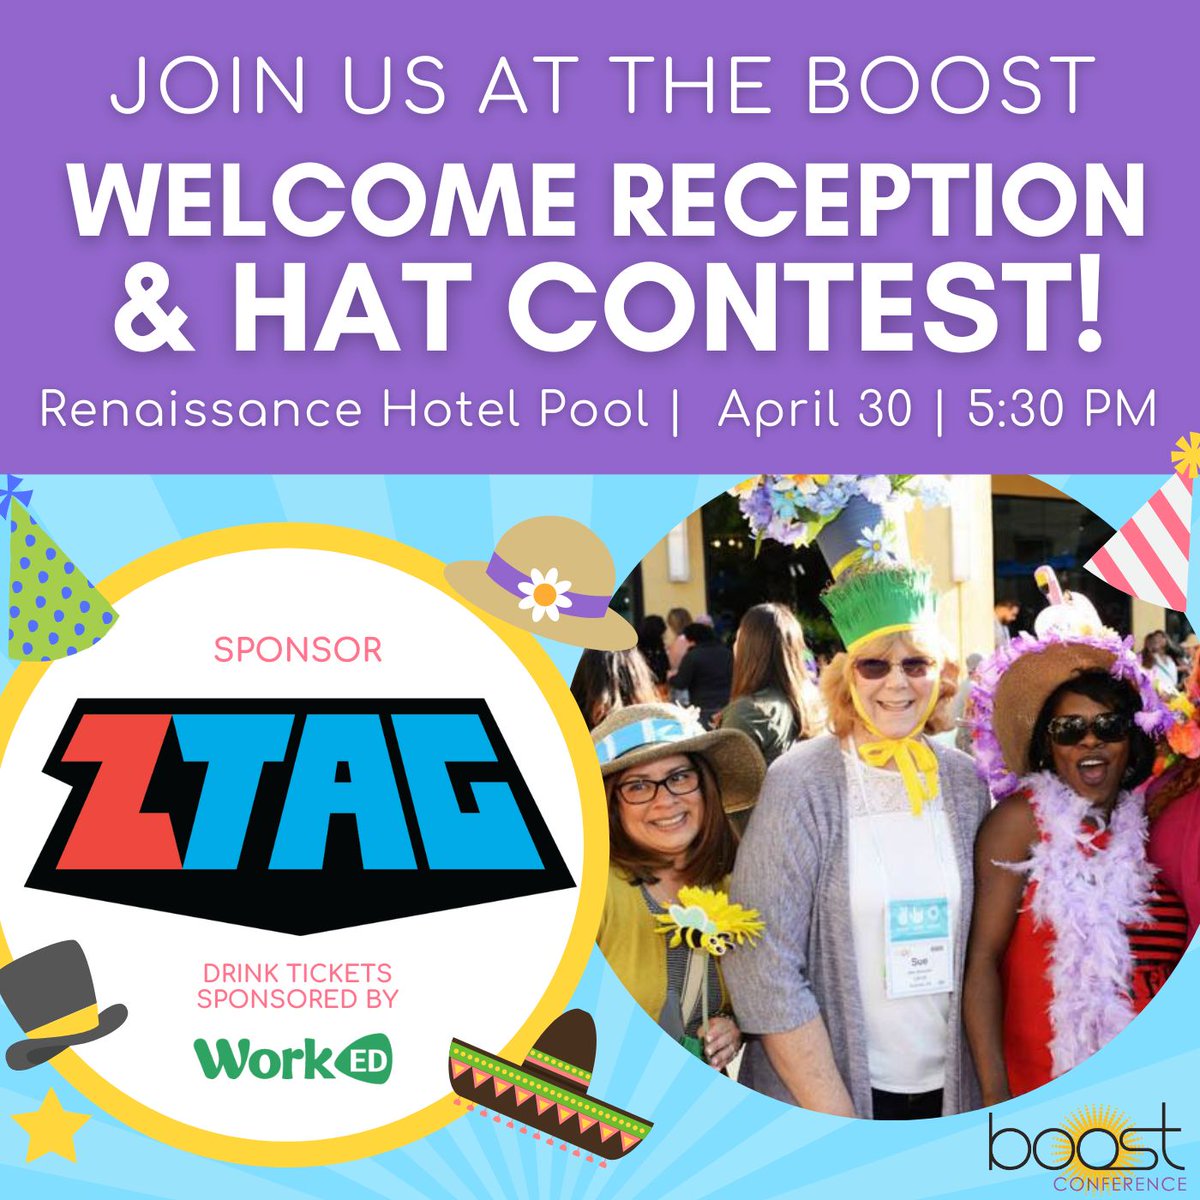 Put on your festive hats & join us by the Renaissance pool for the 2024 #boostconference Welcome Reception & Hat Contest! Stop by our sponsor @PlayZTAG's table to meet them & learn how to engage kids by combining tech with social, physical, and learning activities!